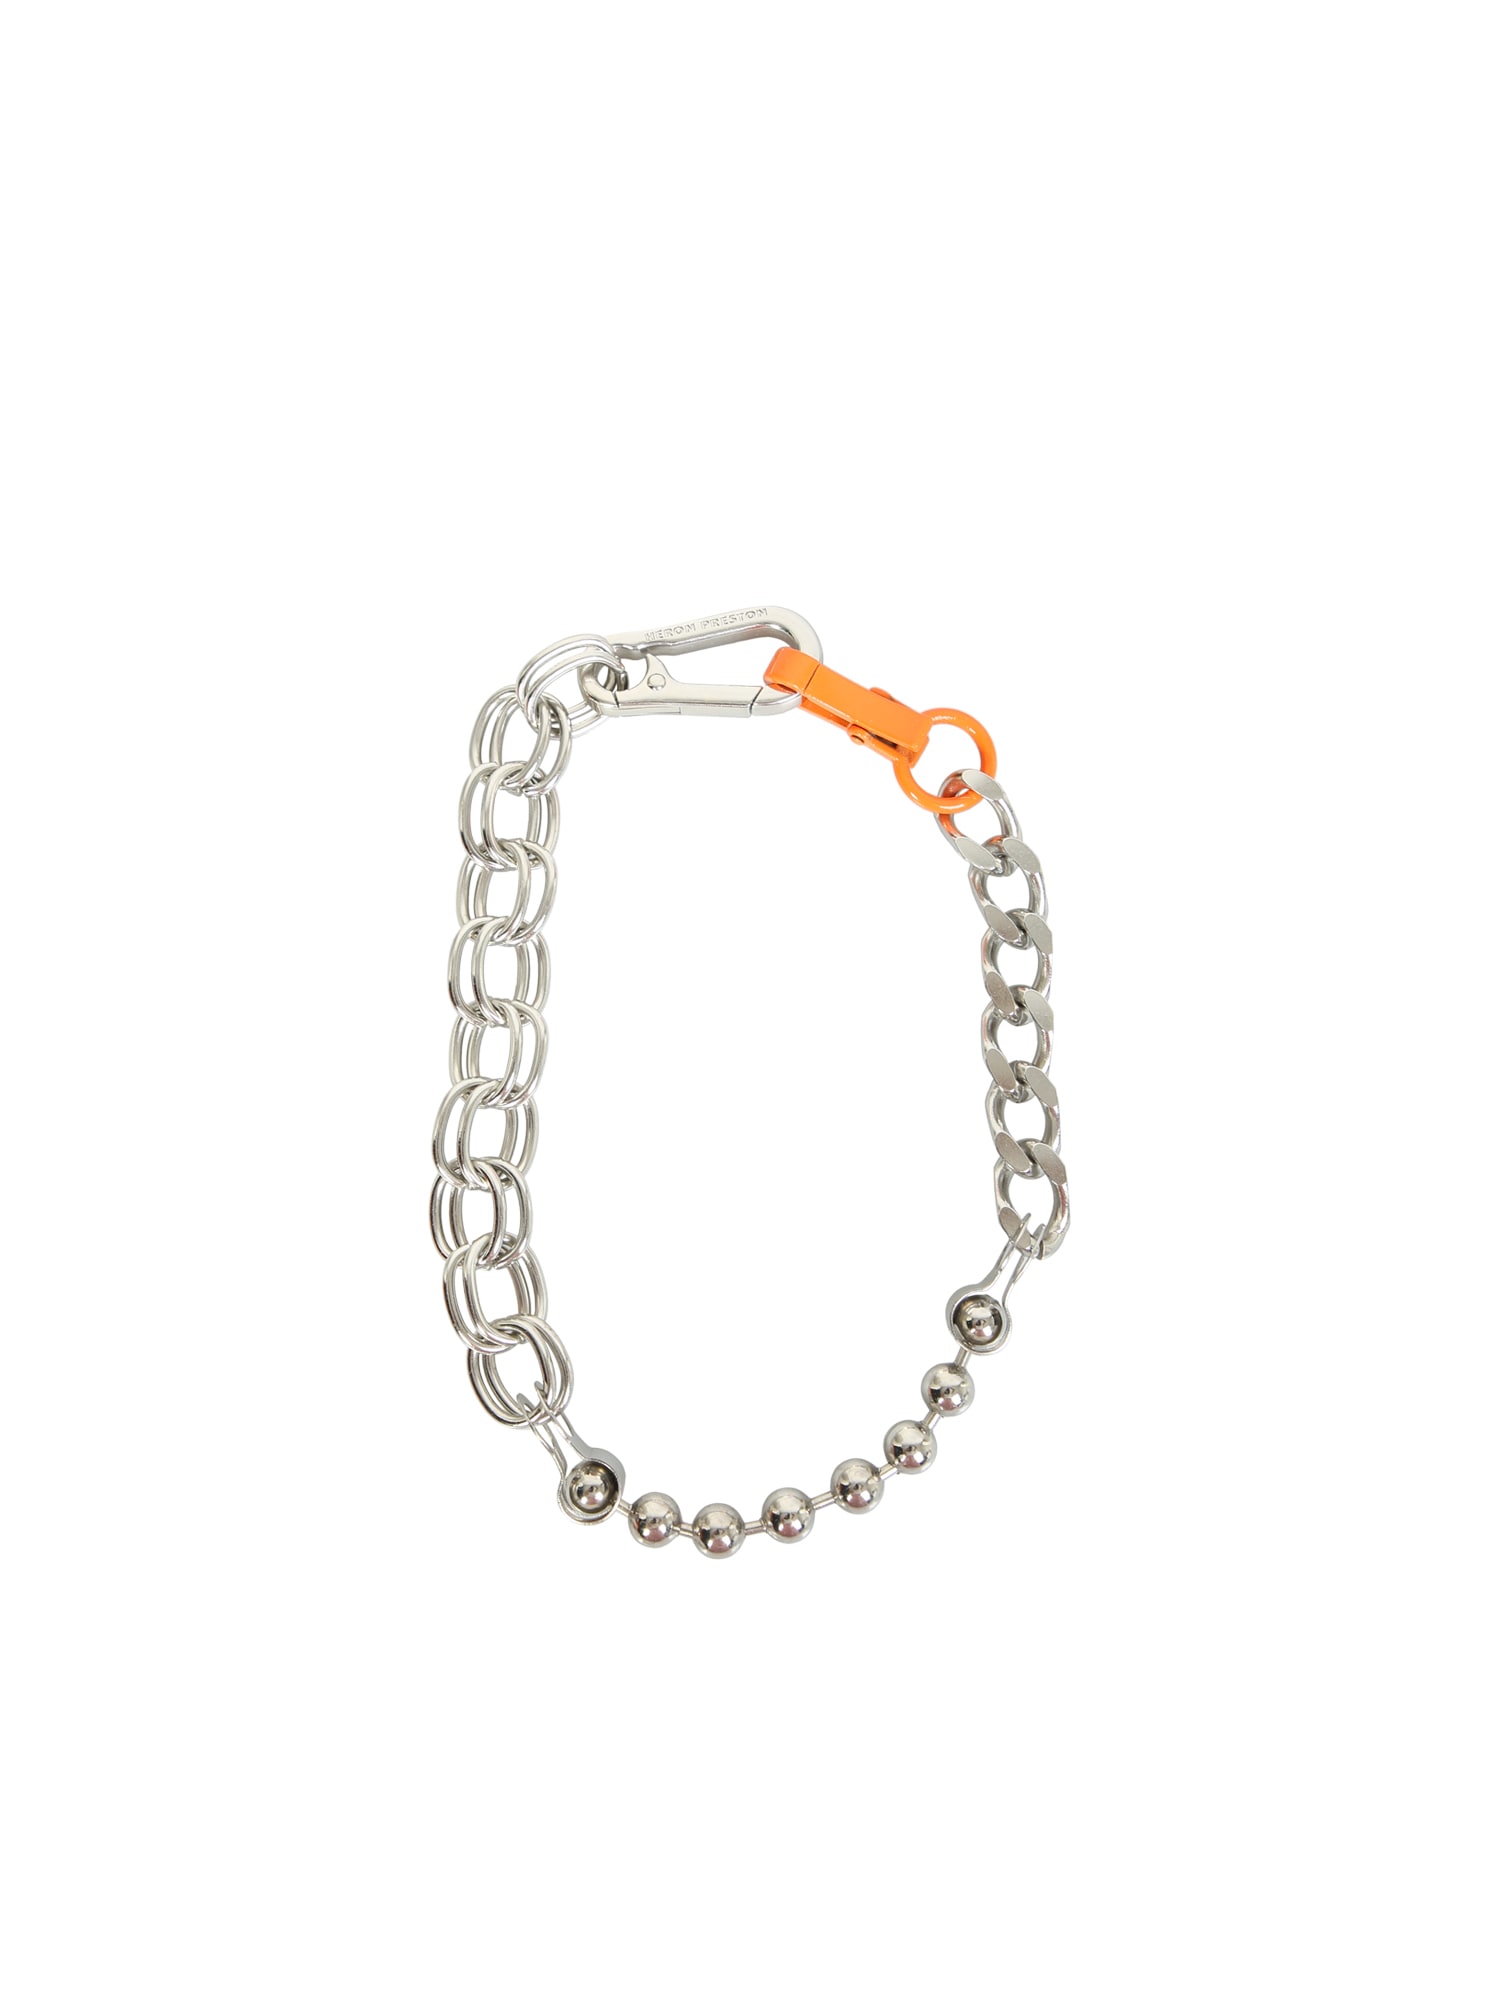 Heron Preston Chain Necklace With Carabiner, Designed And Built Following An Urban Style